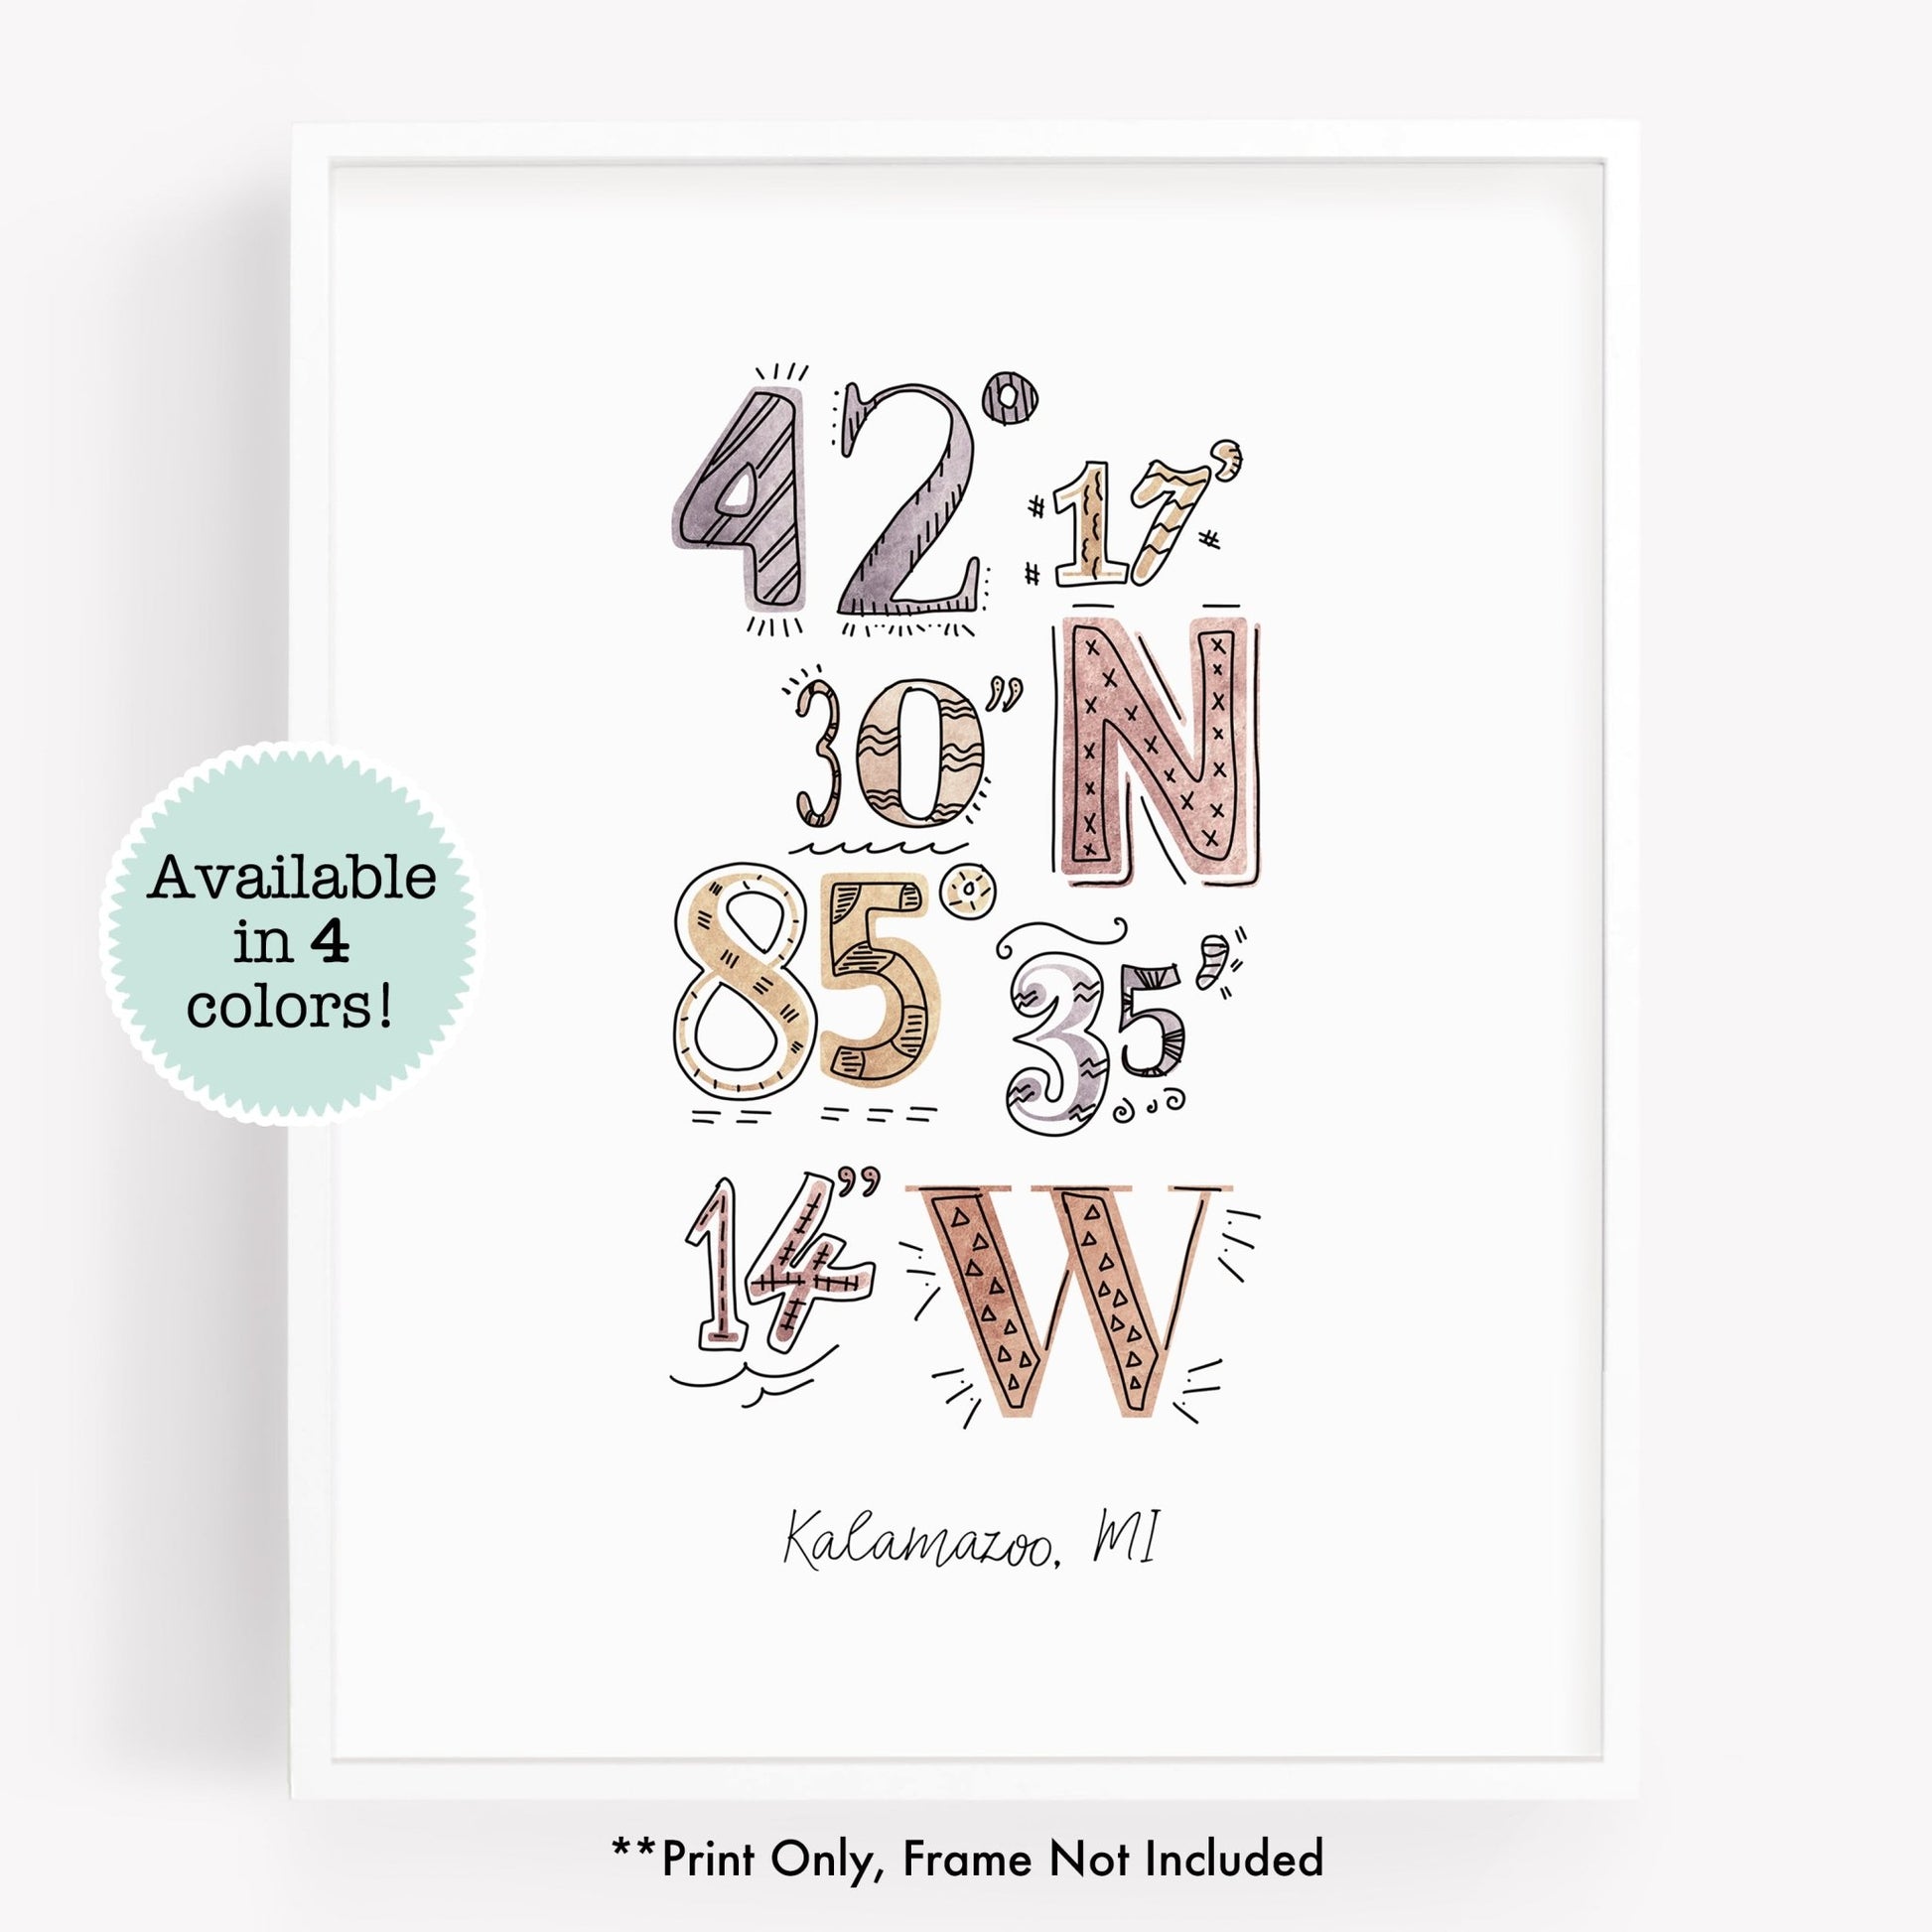 A city art print of a drawing of the coordinates of Kalamazoo, Michigan - Sparks House Co